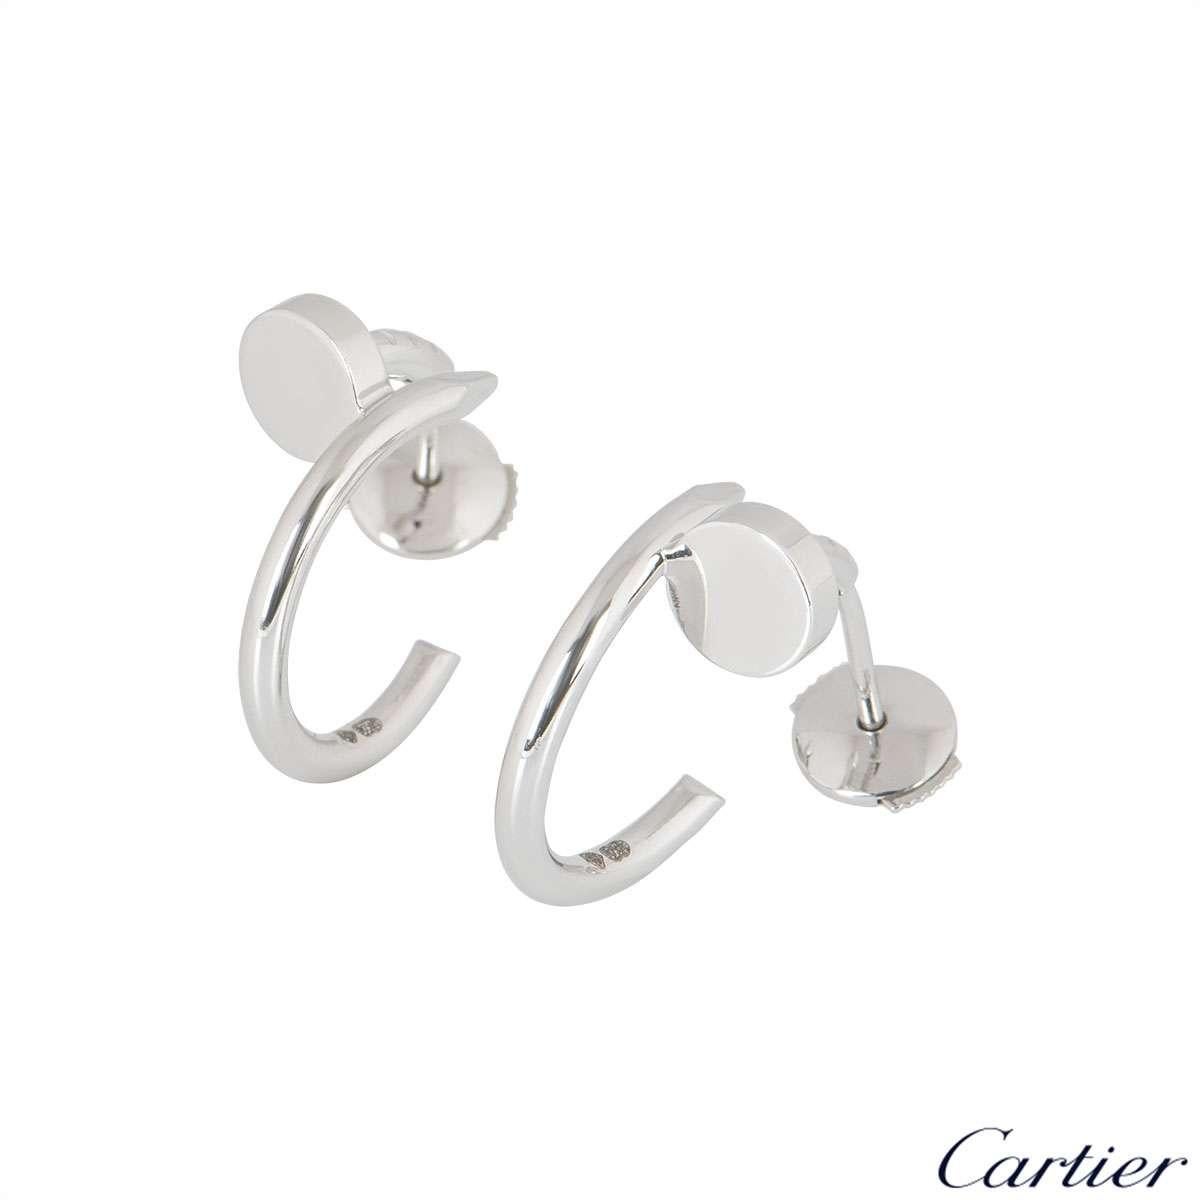 A pair of 18k white gold earrings from the Juste un Clou collection by Cartier. The earrings are styled as a nail wrapping around the earlobe. The earrings measure 1.5cm in diameter and feature post and alpha back fittings, with a gross weight of